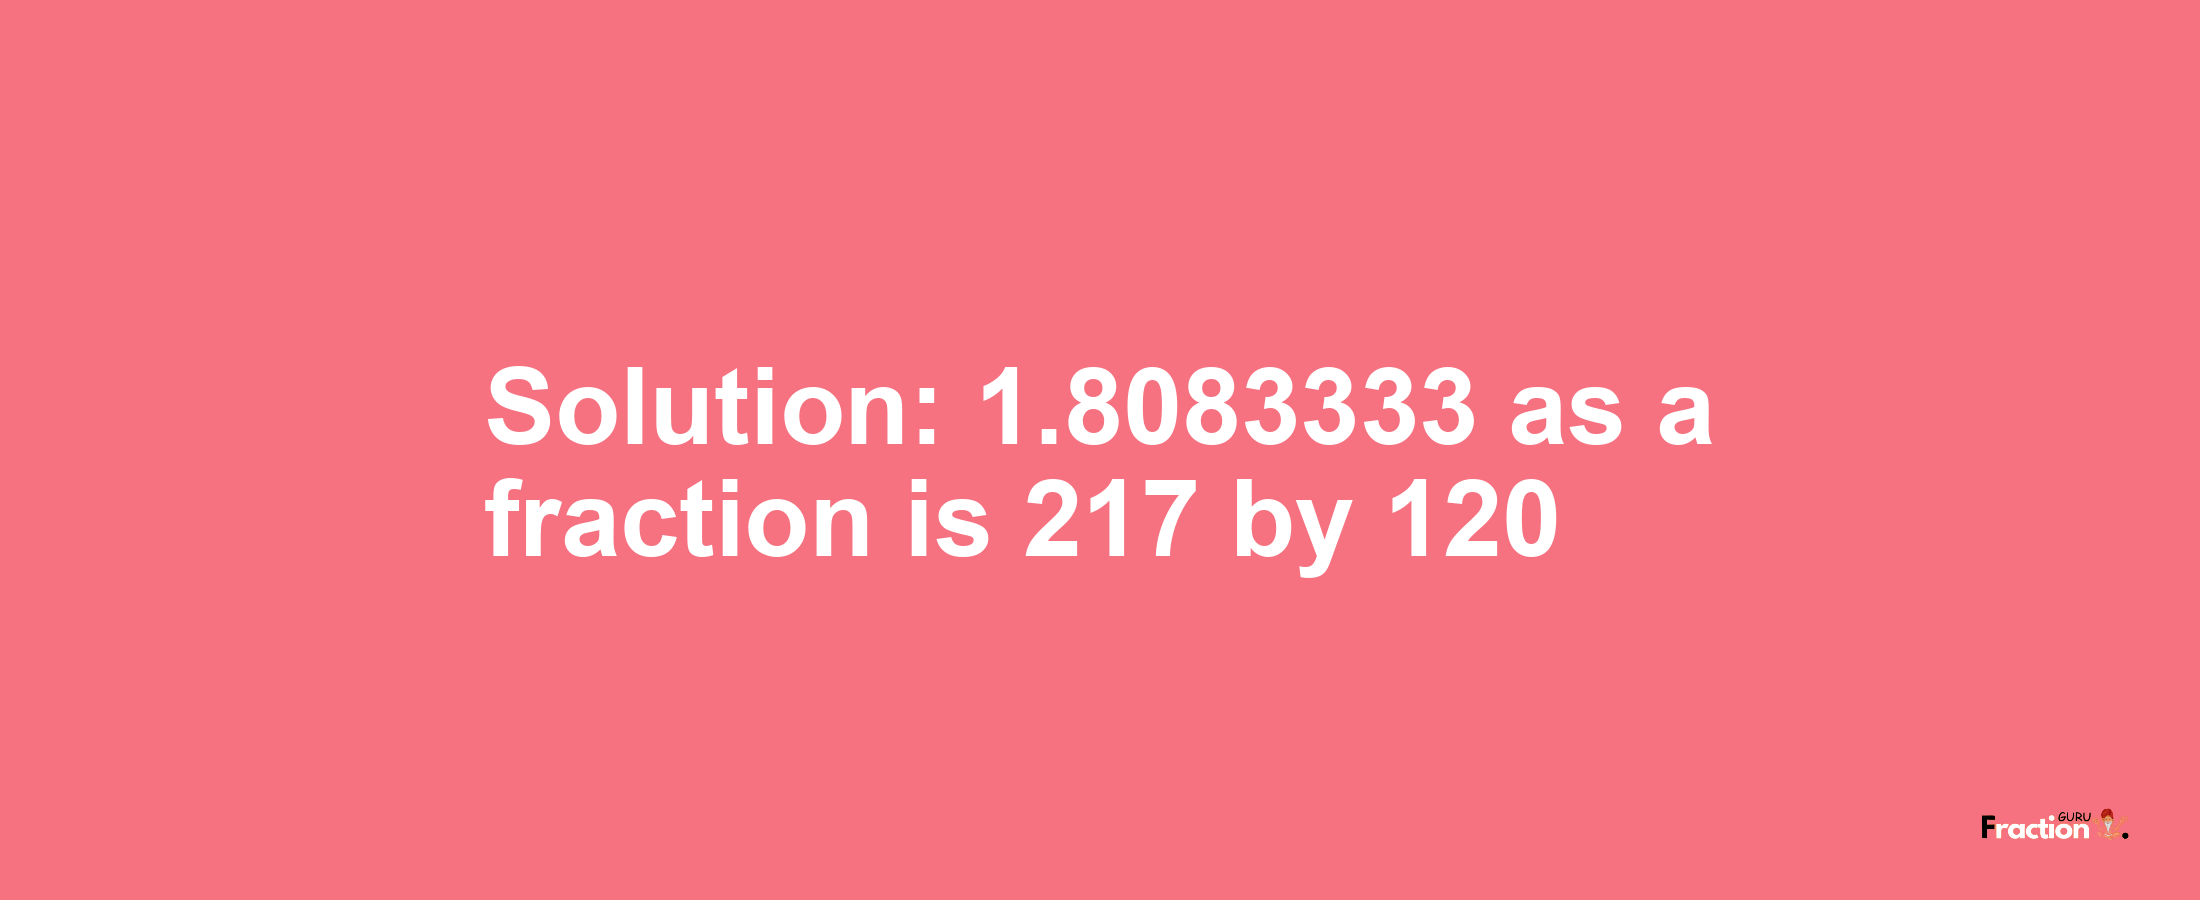 Solution:1.8083333 as a fraction is 217/120